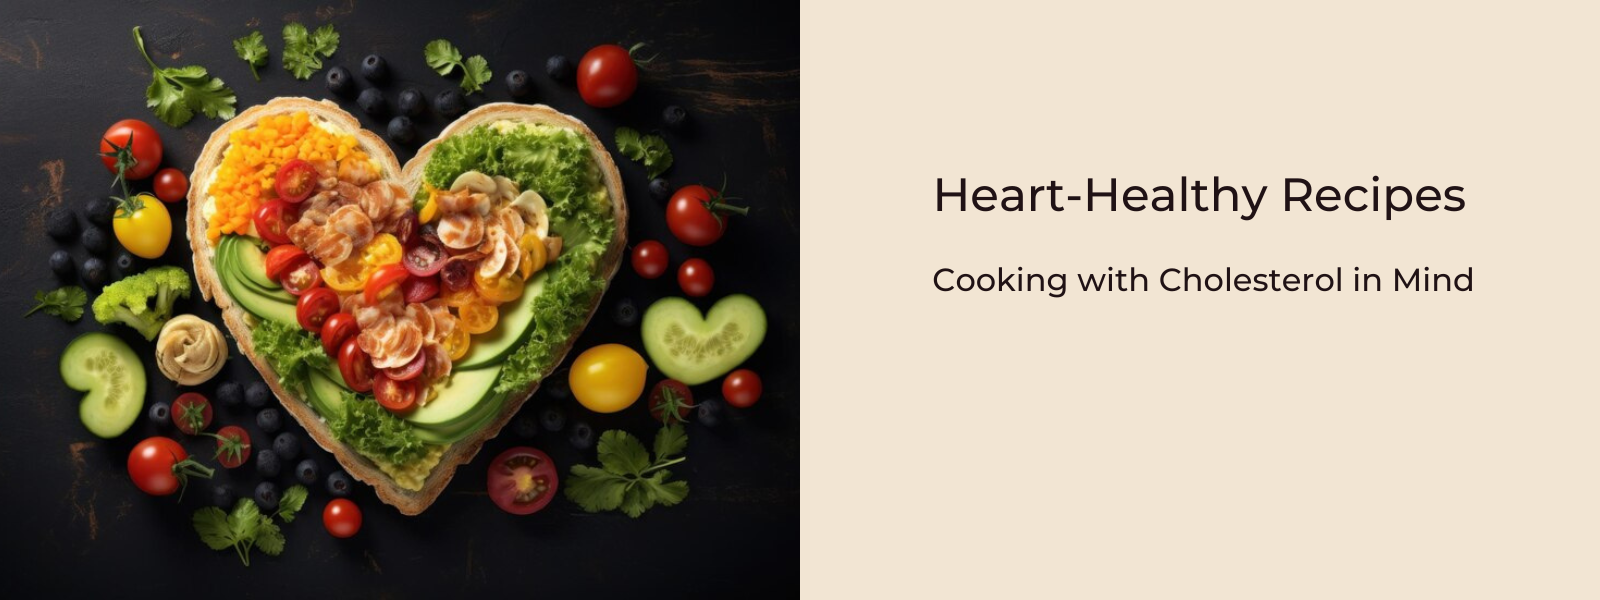 Heart-Healthy Recipes: Cooking with Cholesterol in Mind